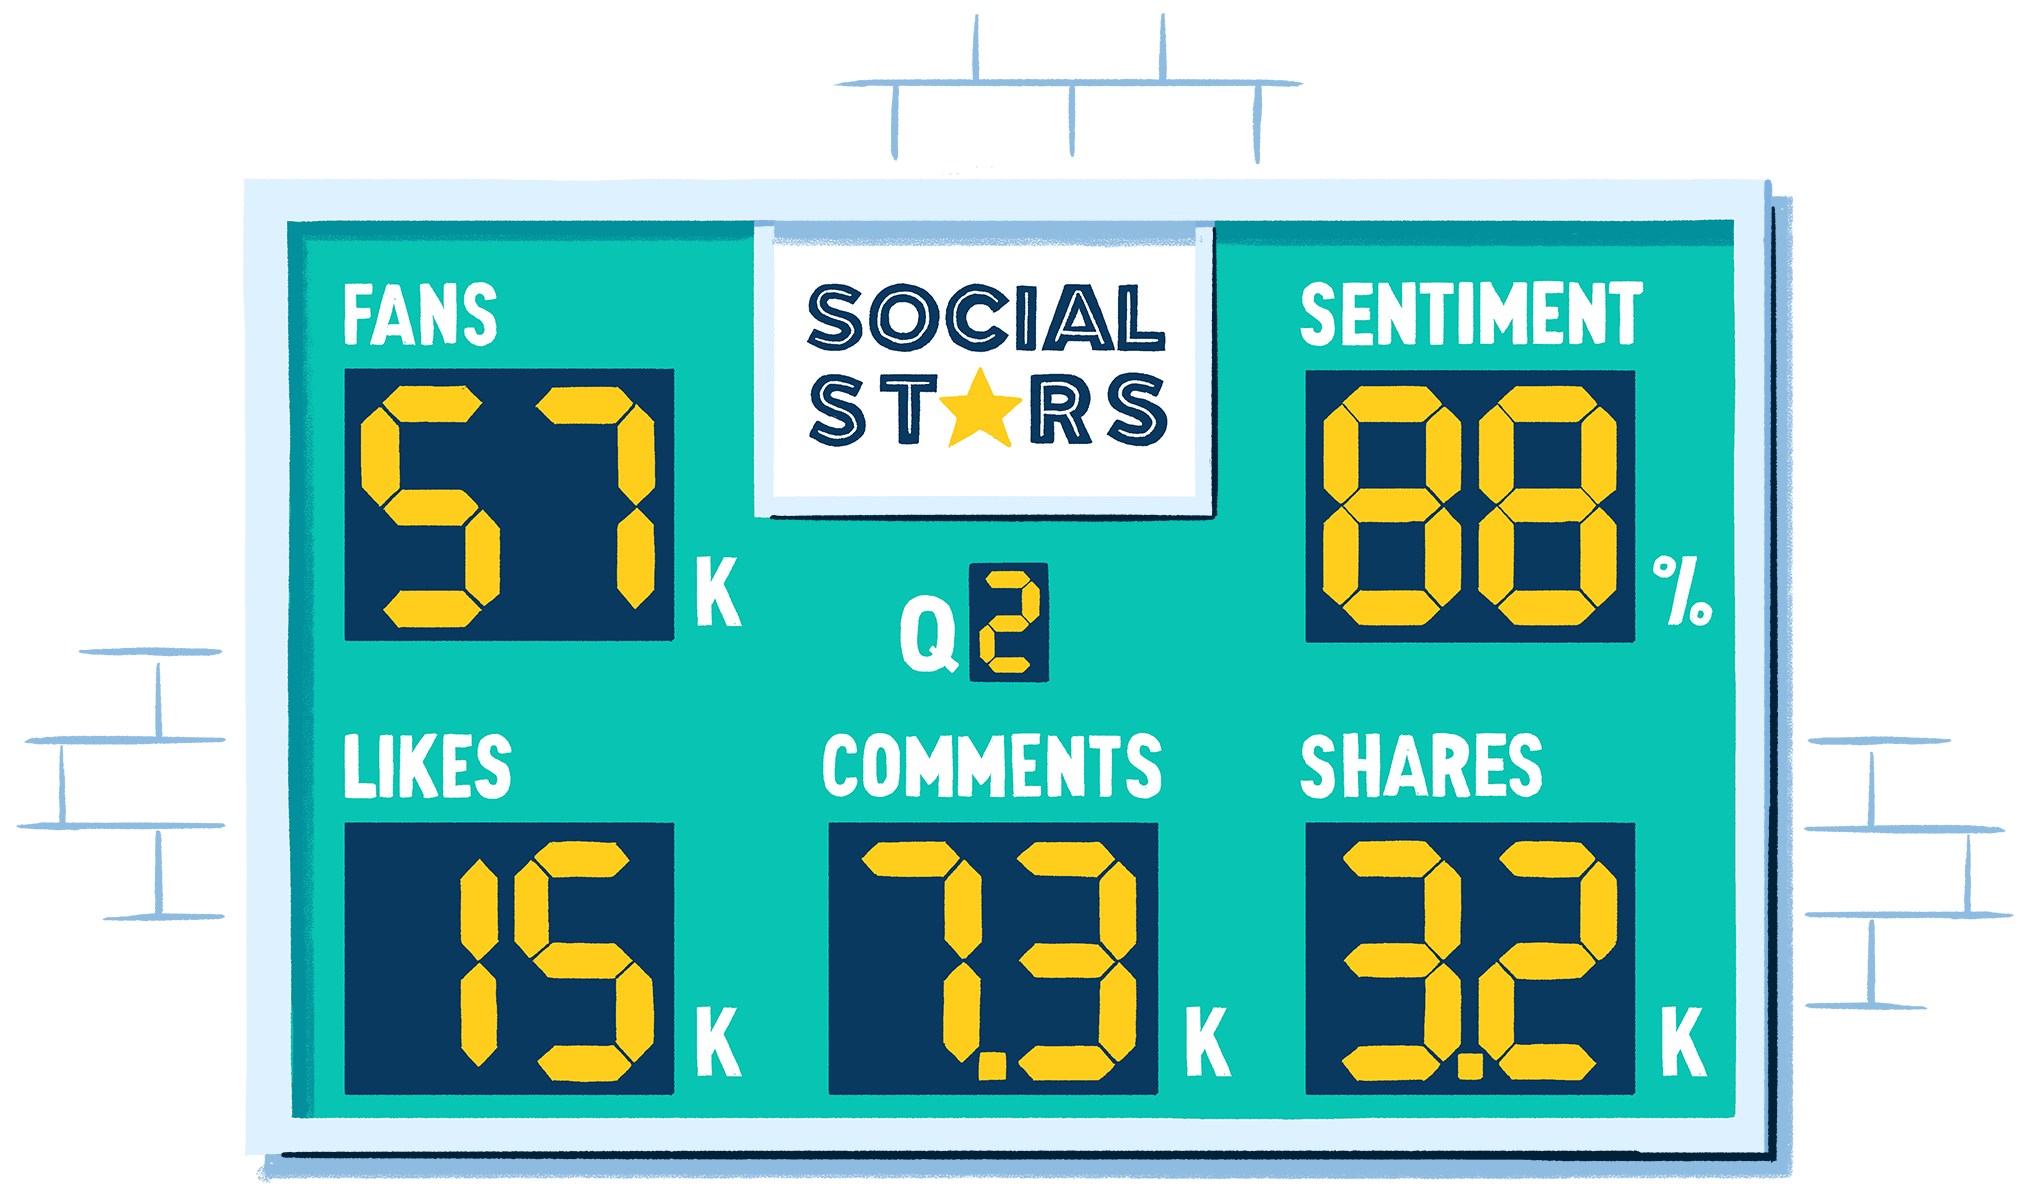 Scoreboard shows engagement metrics including fans, likes, comments, shares, and sentiment.